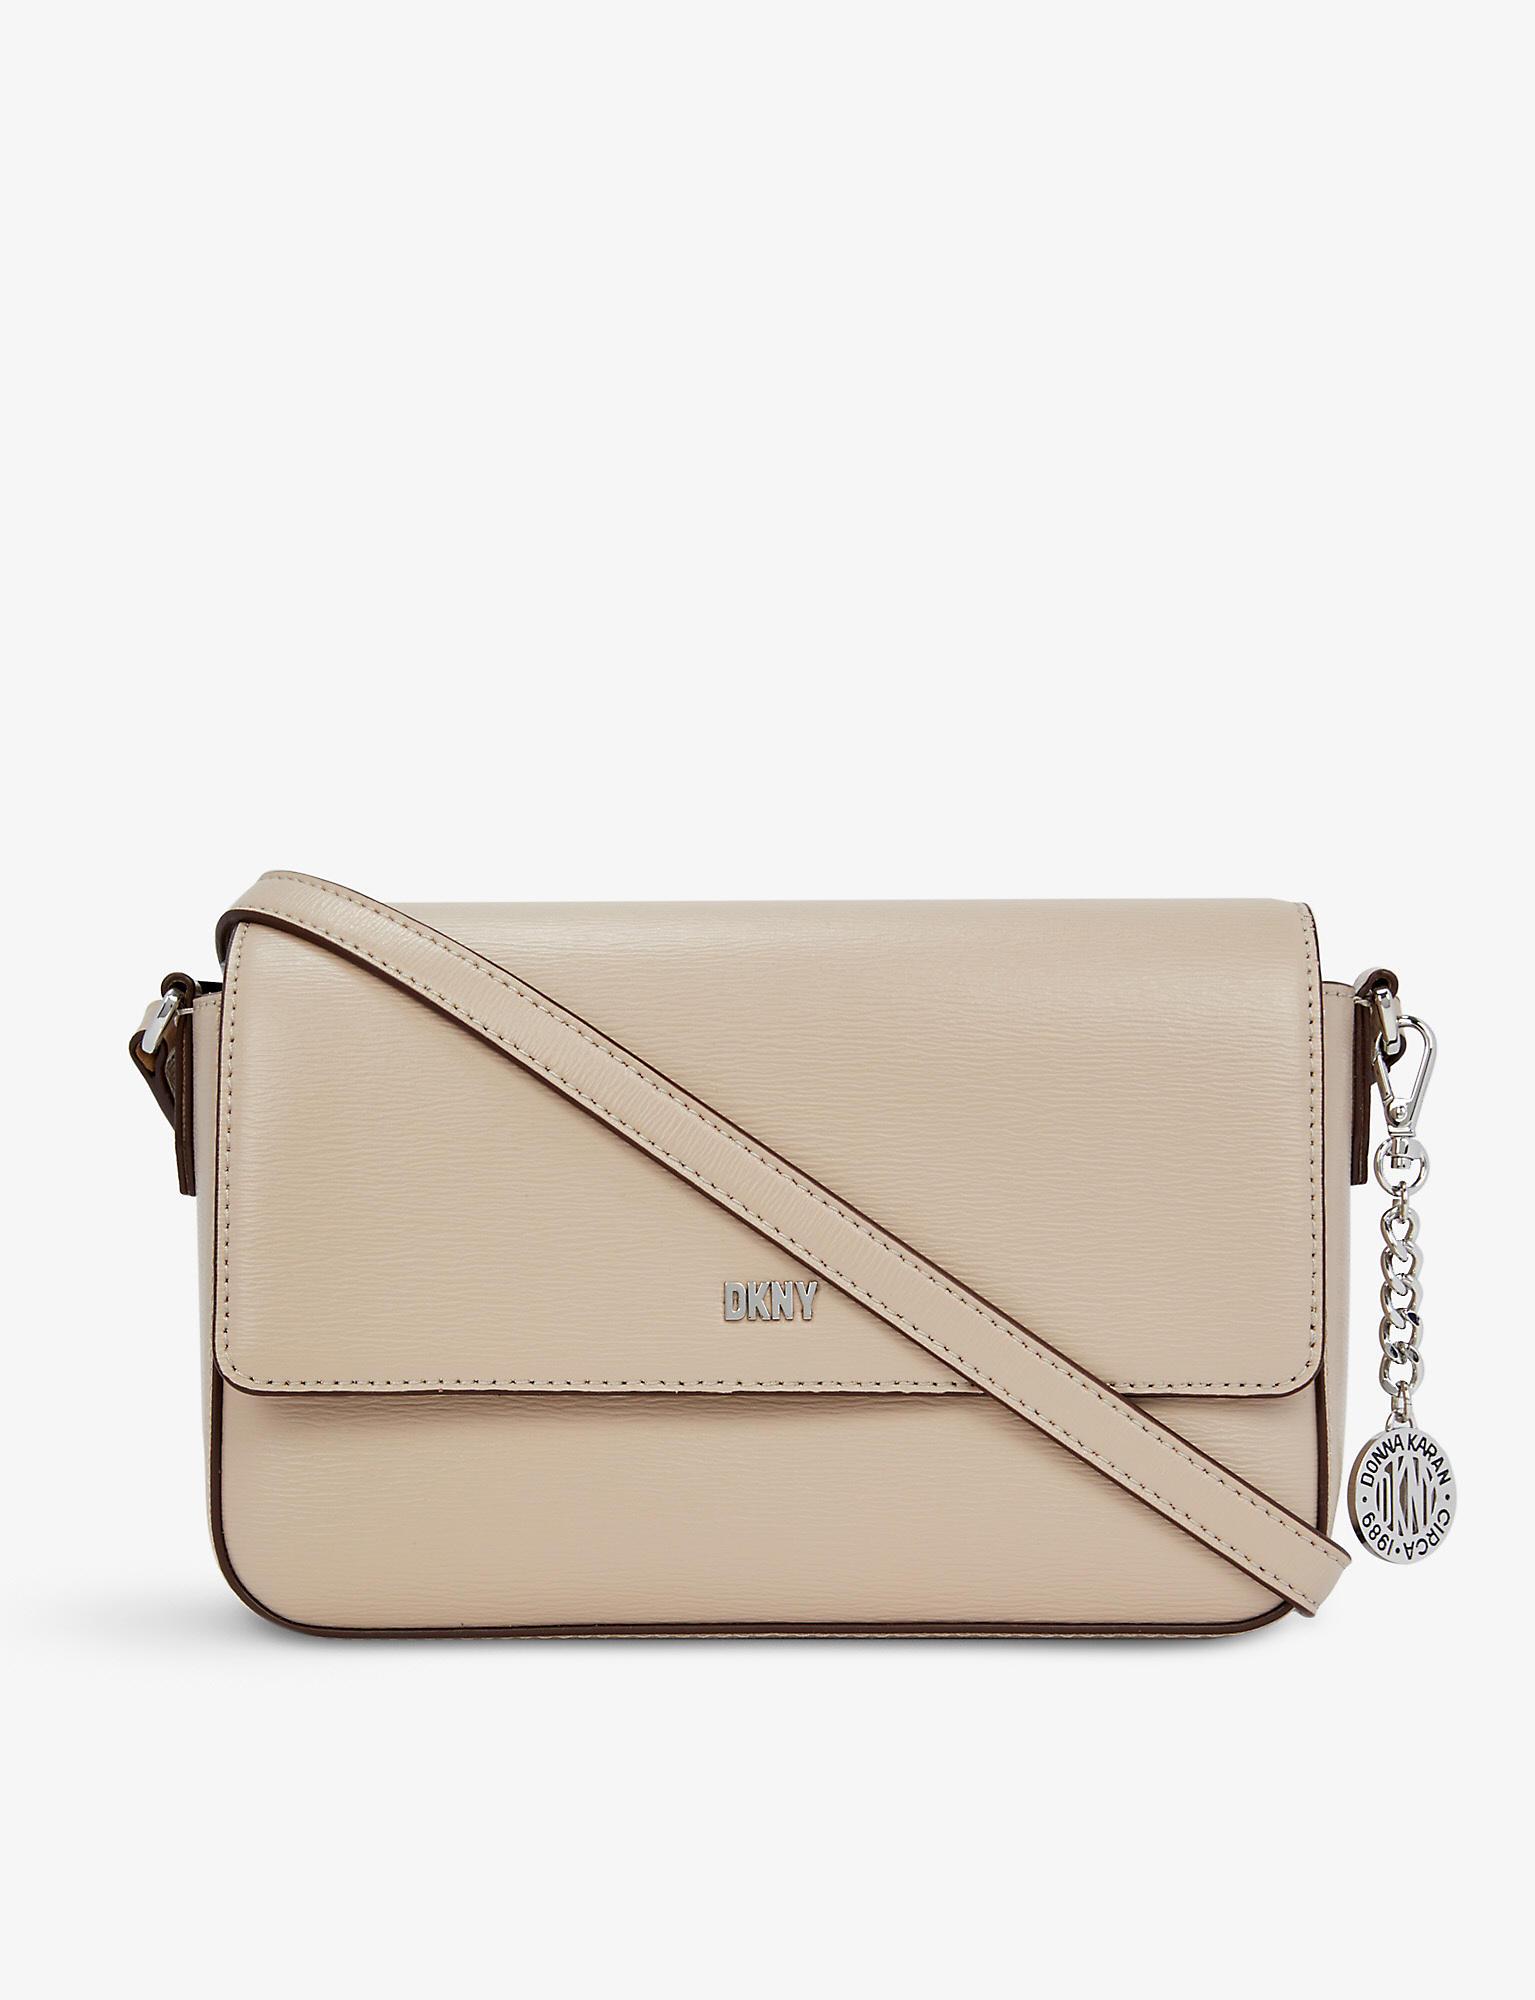 DKNY Bryant Leather Cross-body Bag in Natural | Lyst